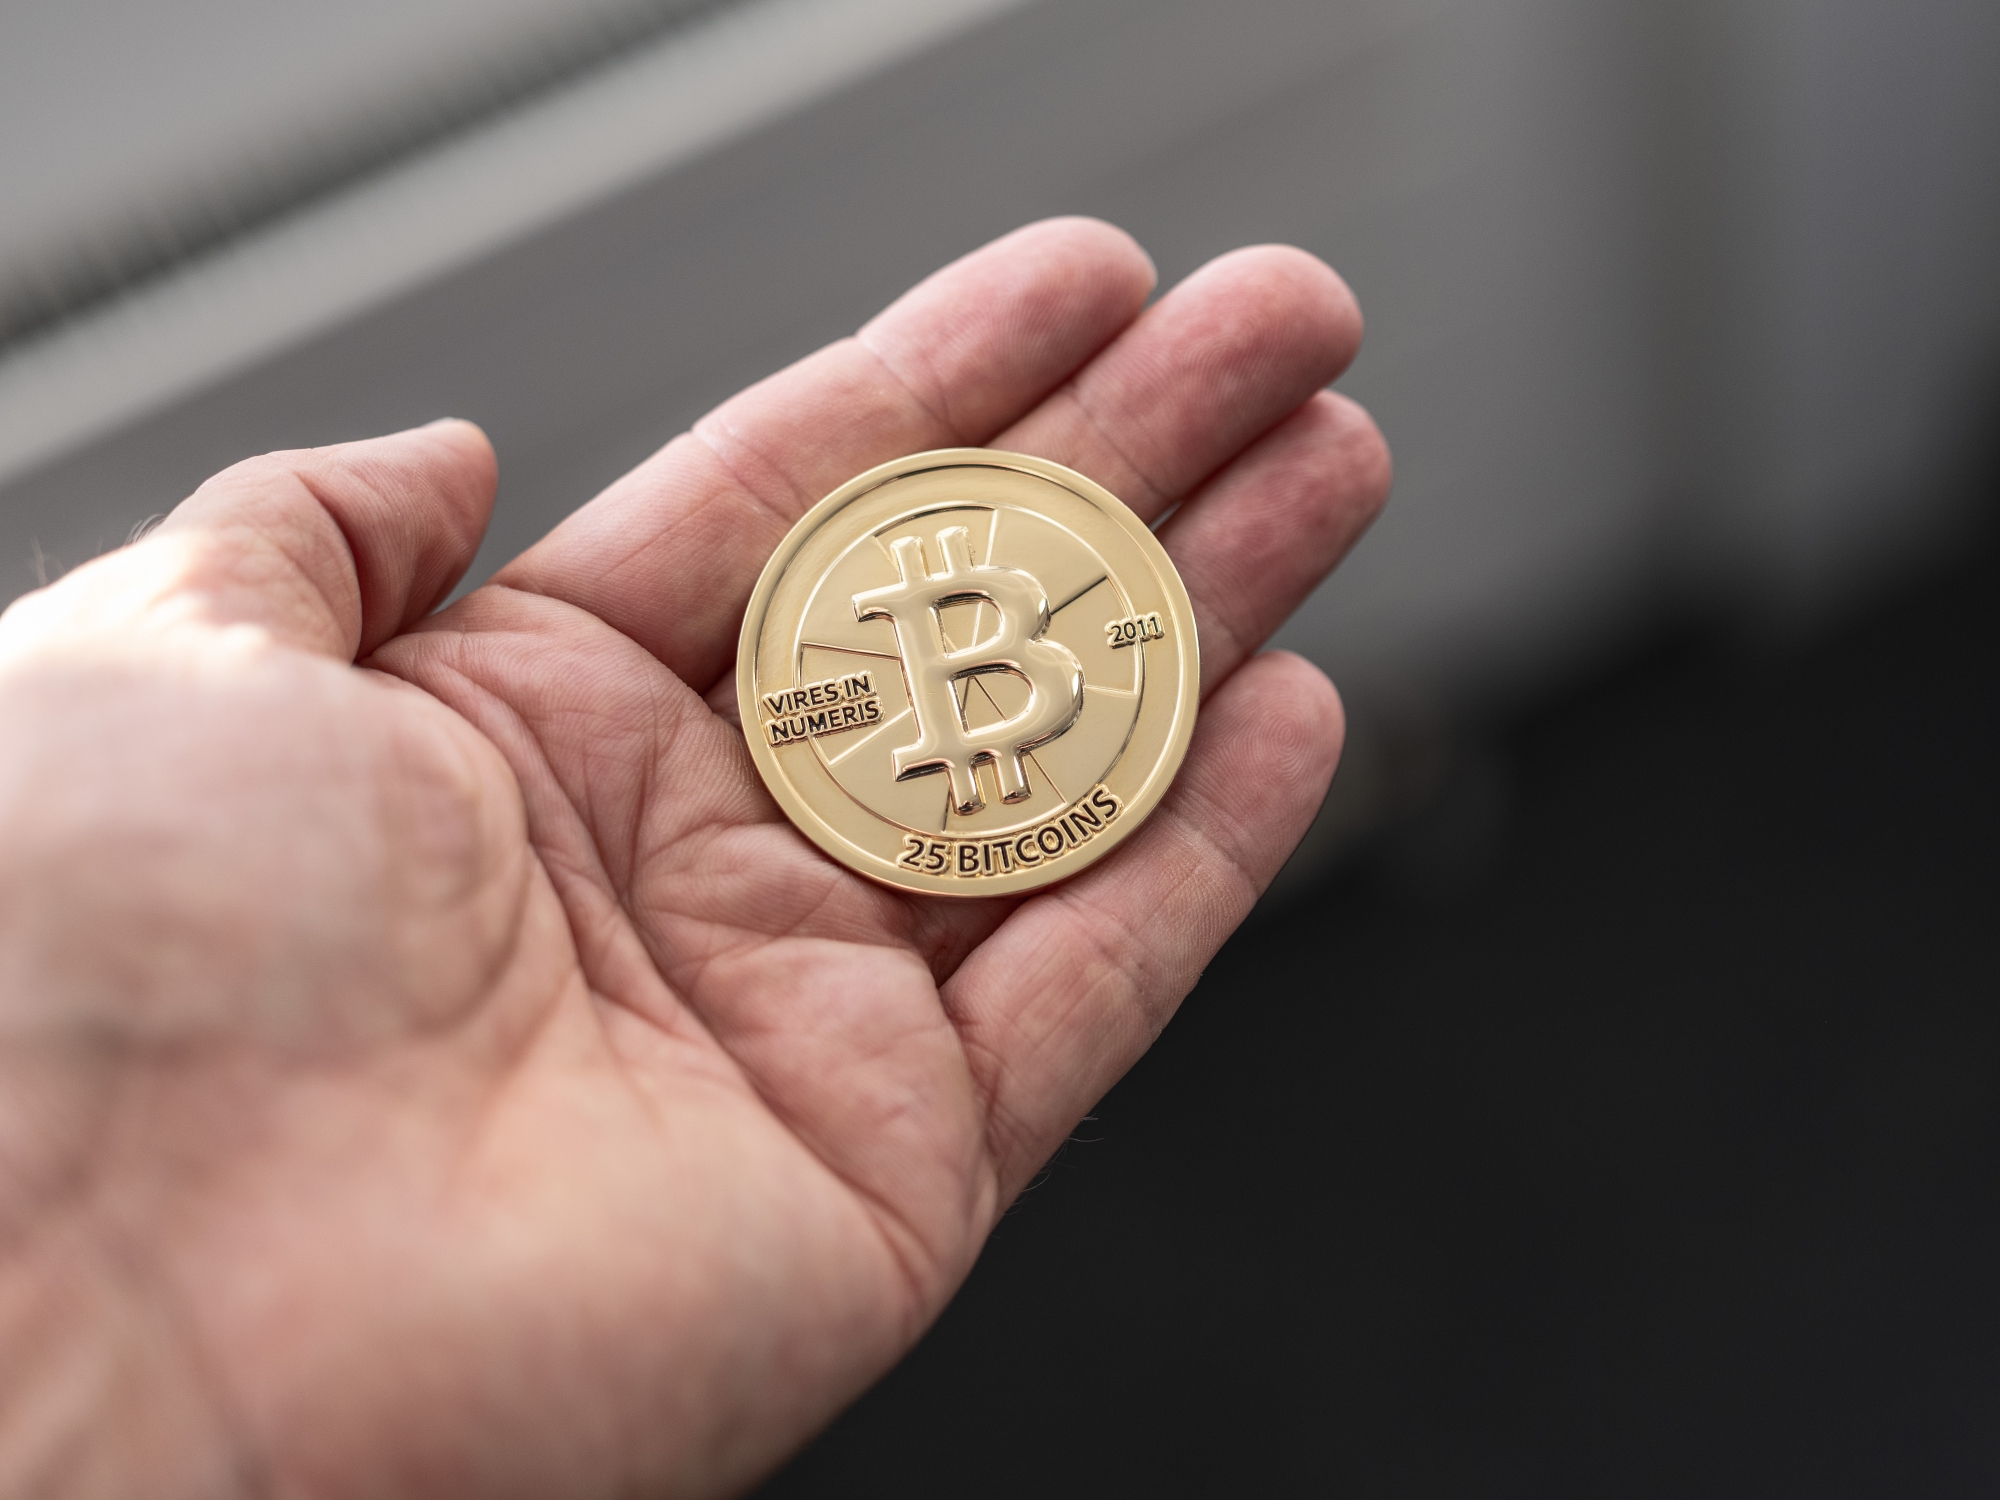 A 25 Bitcoin coin pictured in Zug, Switzerland, on October 24, 2018. (KEYSTONE/Christian Beutler)